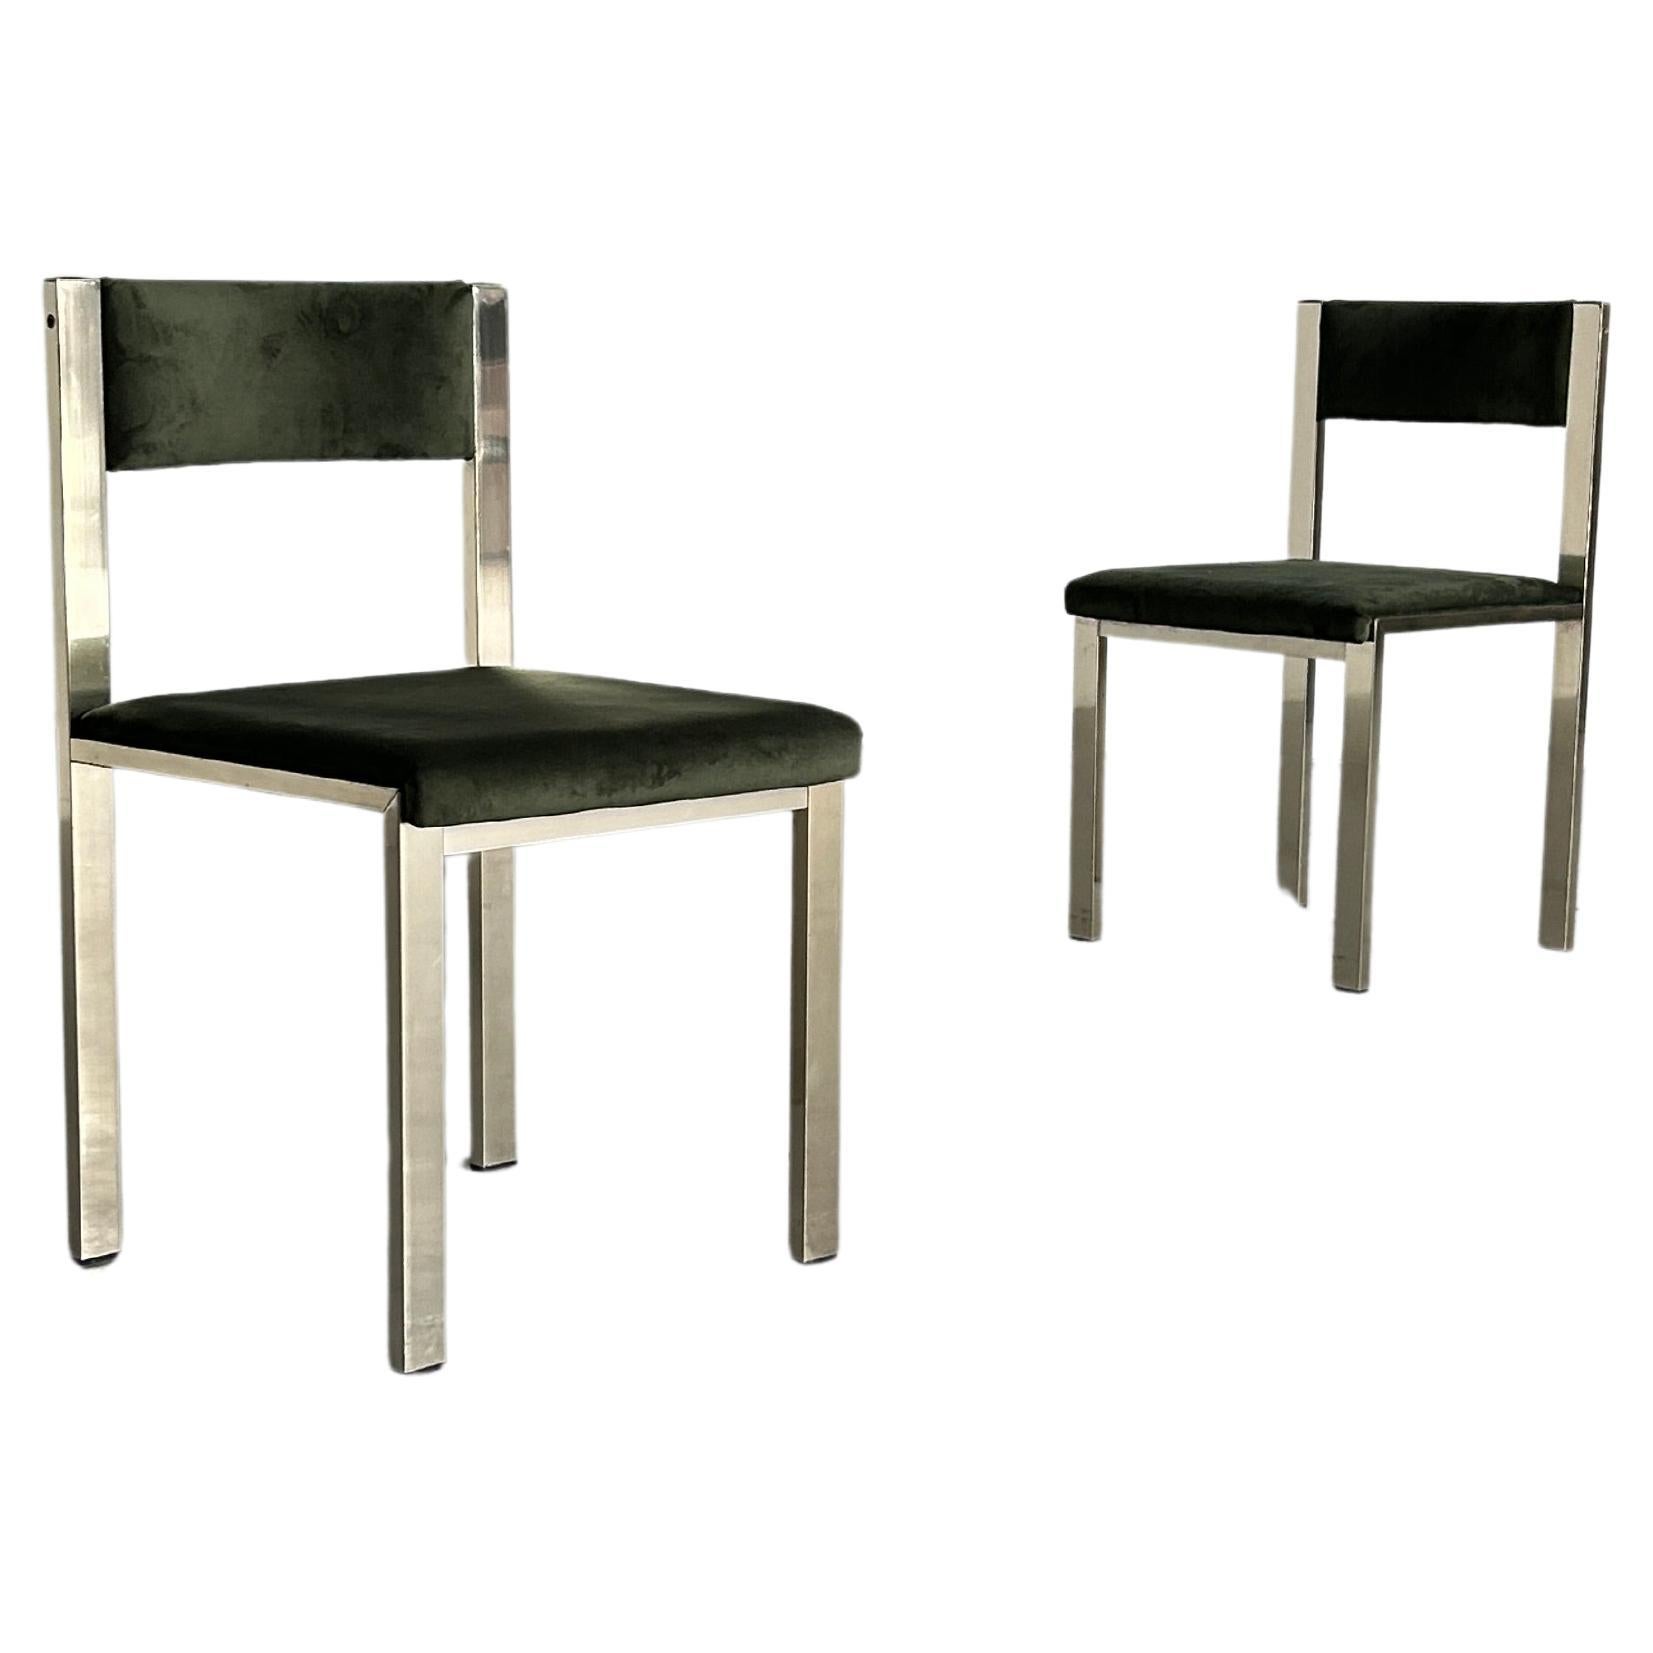 Pair of Italian Modernist Chairs in Chrome Metal and Green Velvet by Interoffice